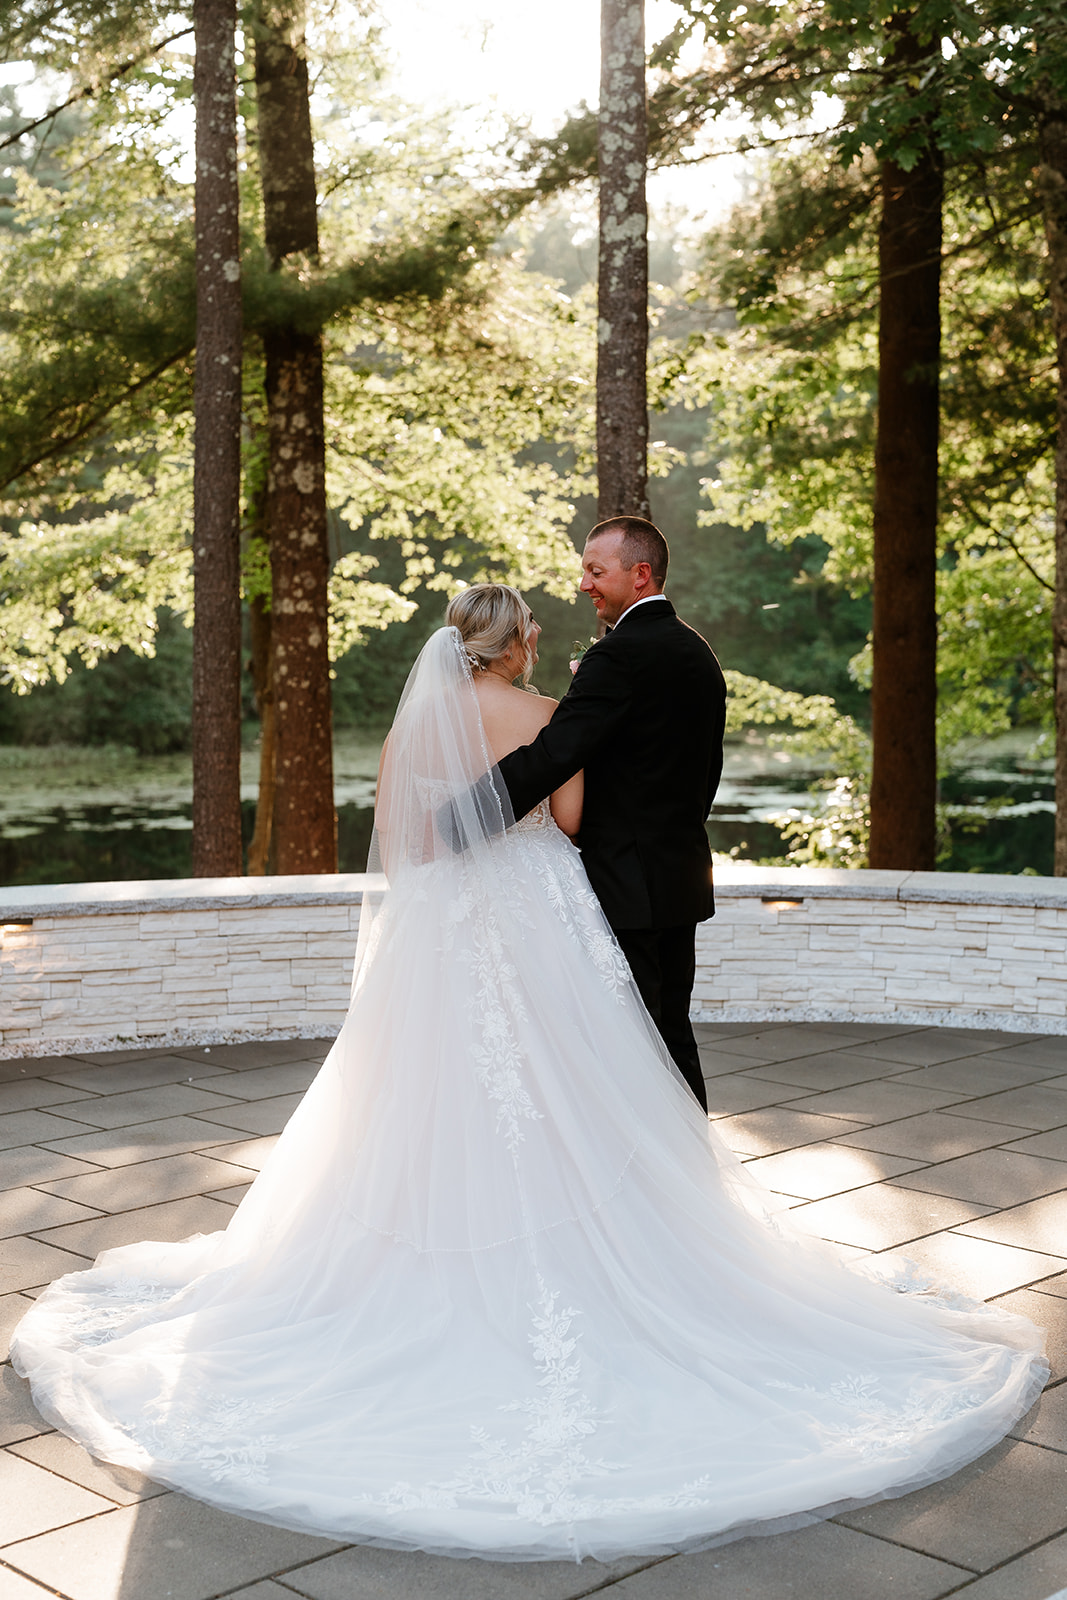 A bride in a white strapless gown and a groom in a black tuxedo with a bow tie are standing together, smiling at the camera, in an outdoor setting with trees and a water feature.